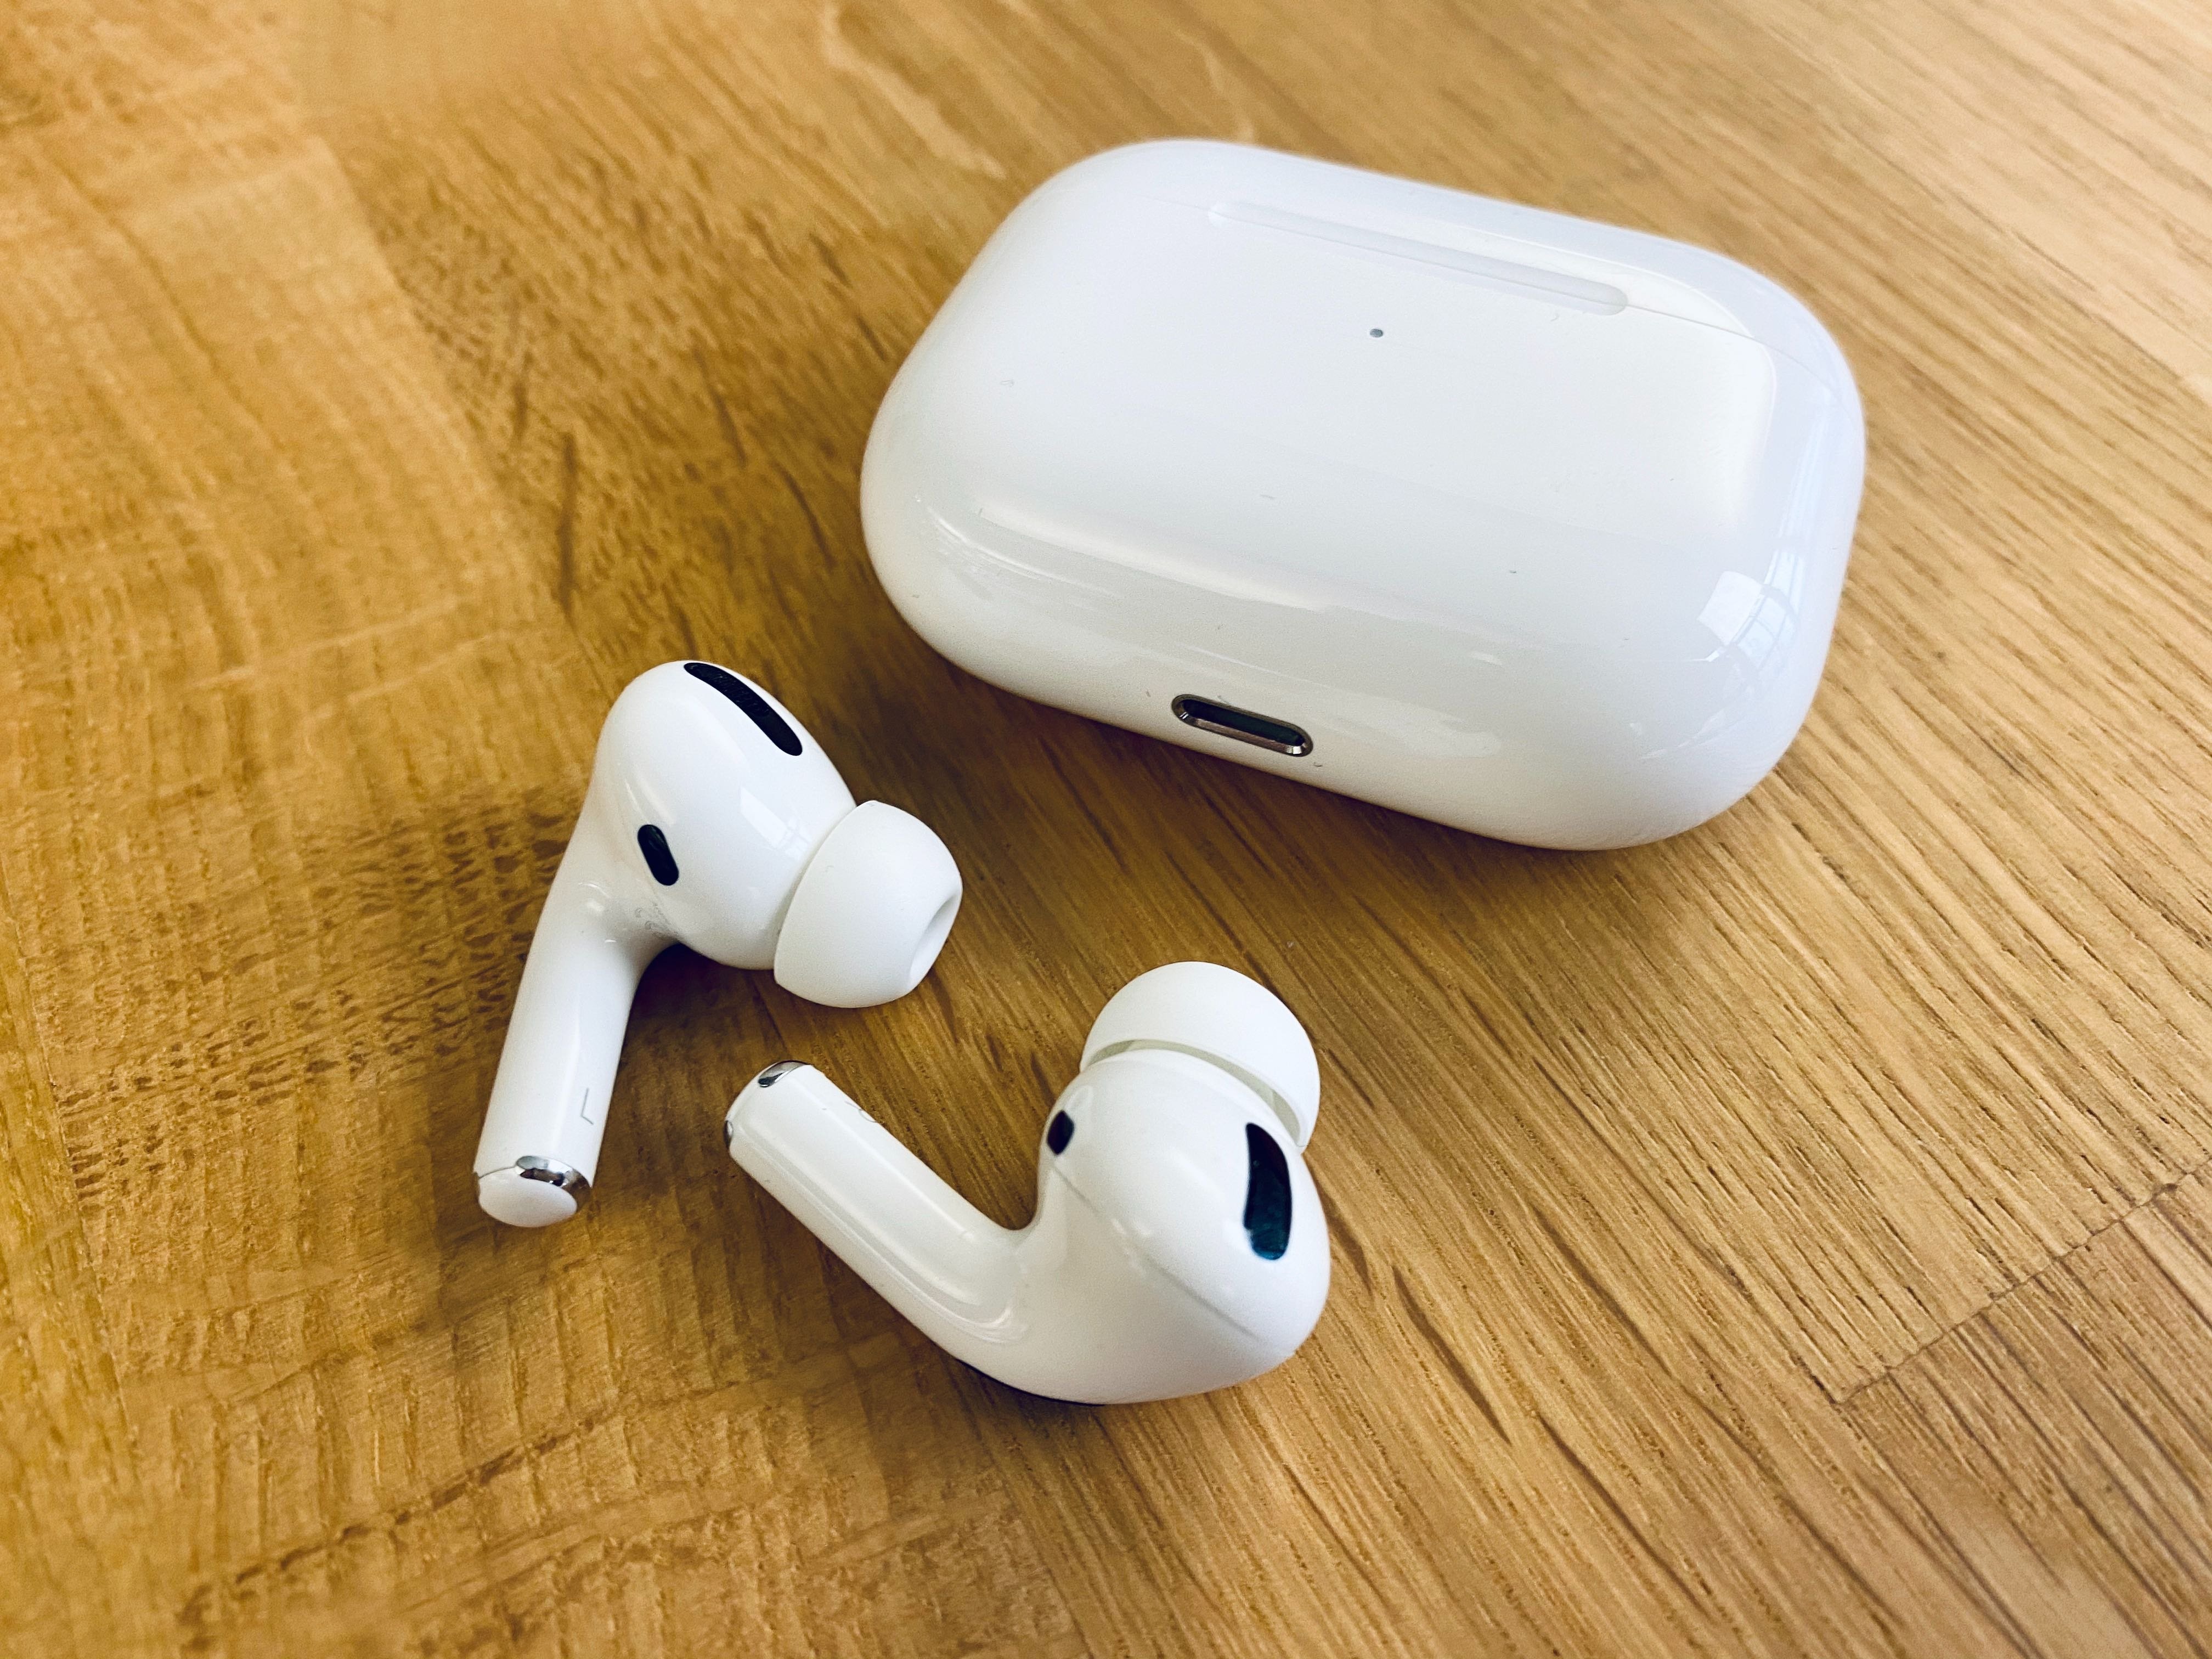 Apple AIRPODS 2. AIRPODS Samsung Galaxy. Apple AIRPODS Pro 2. AIRPODS Pro 2nd Generation. Airpods pro samsung